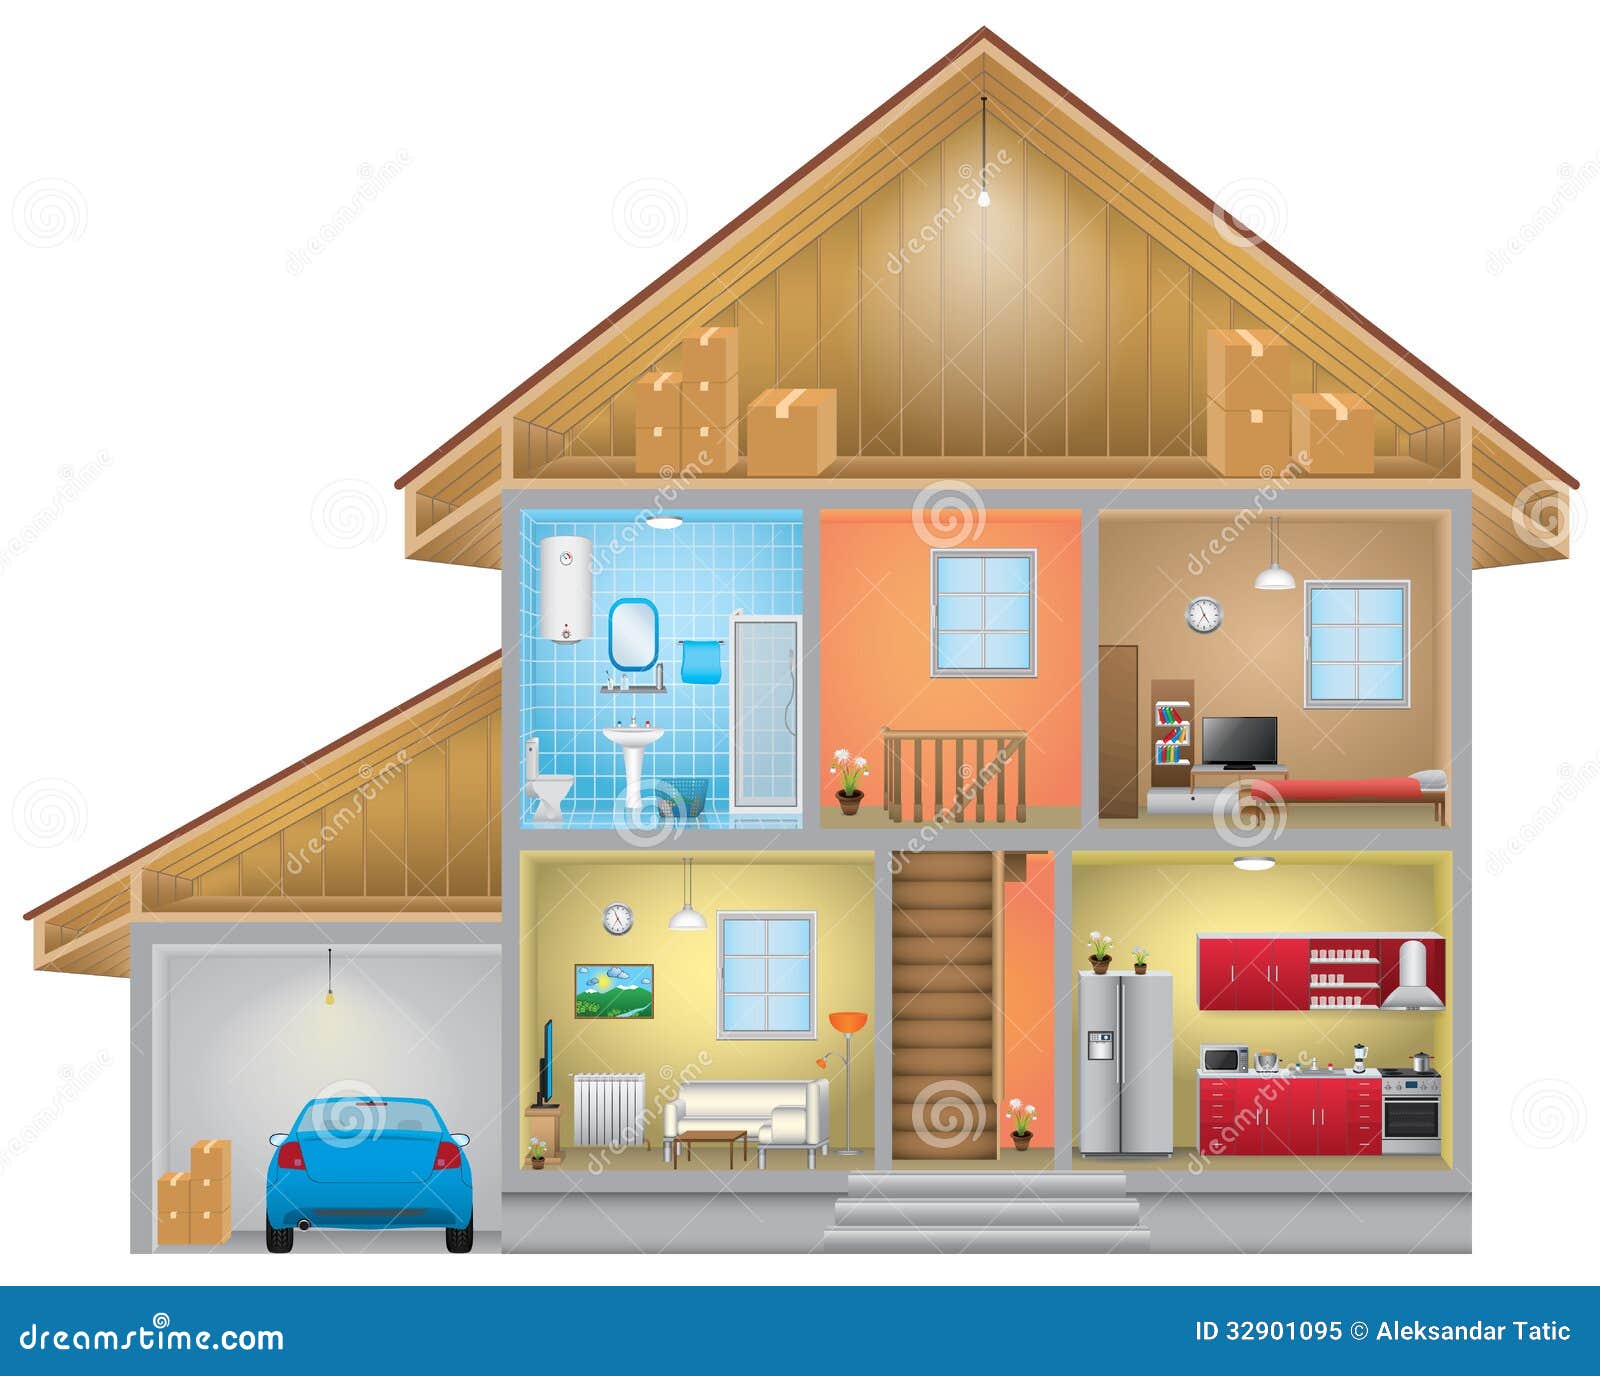 house with garage clipart - photo #11